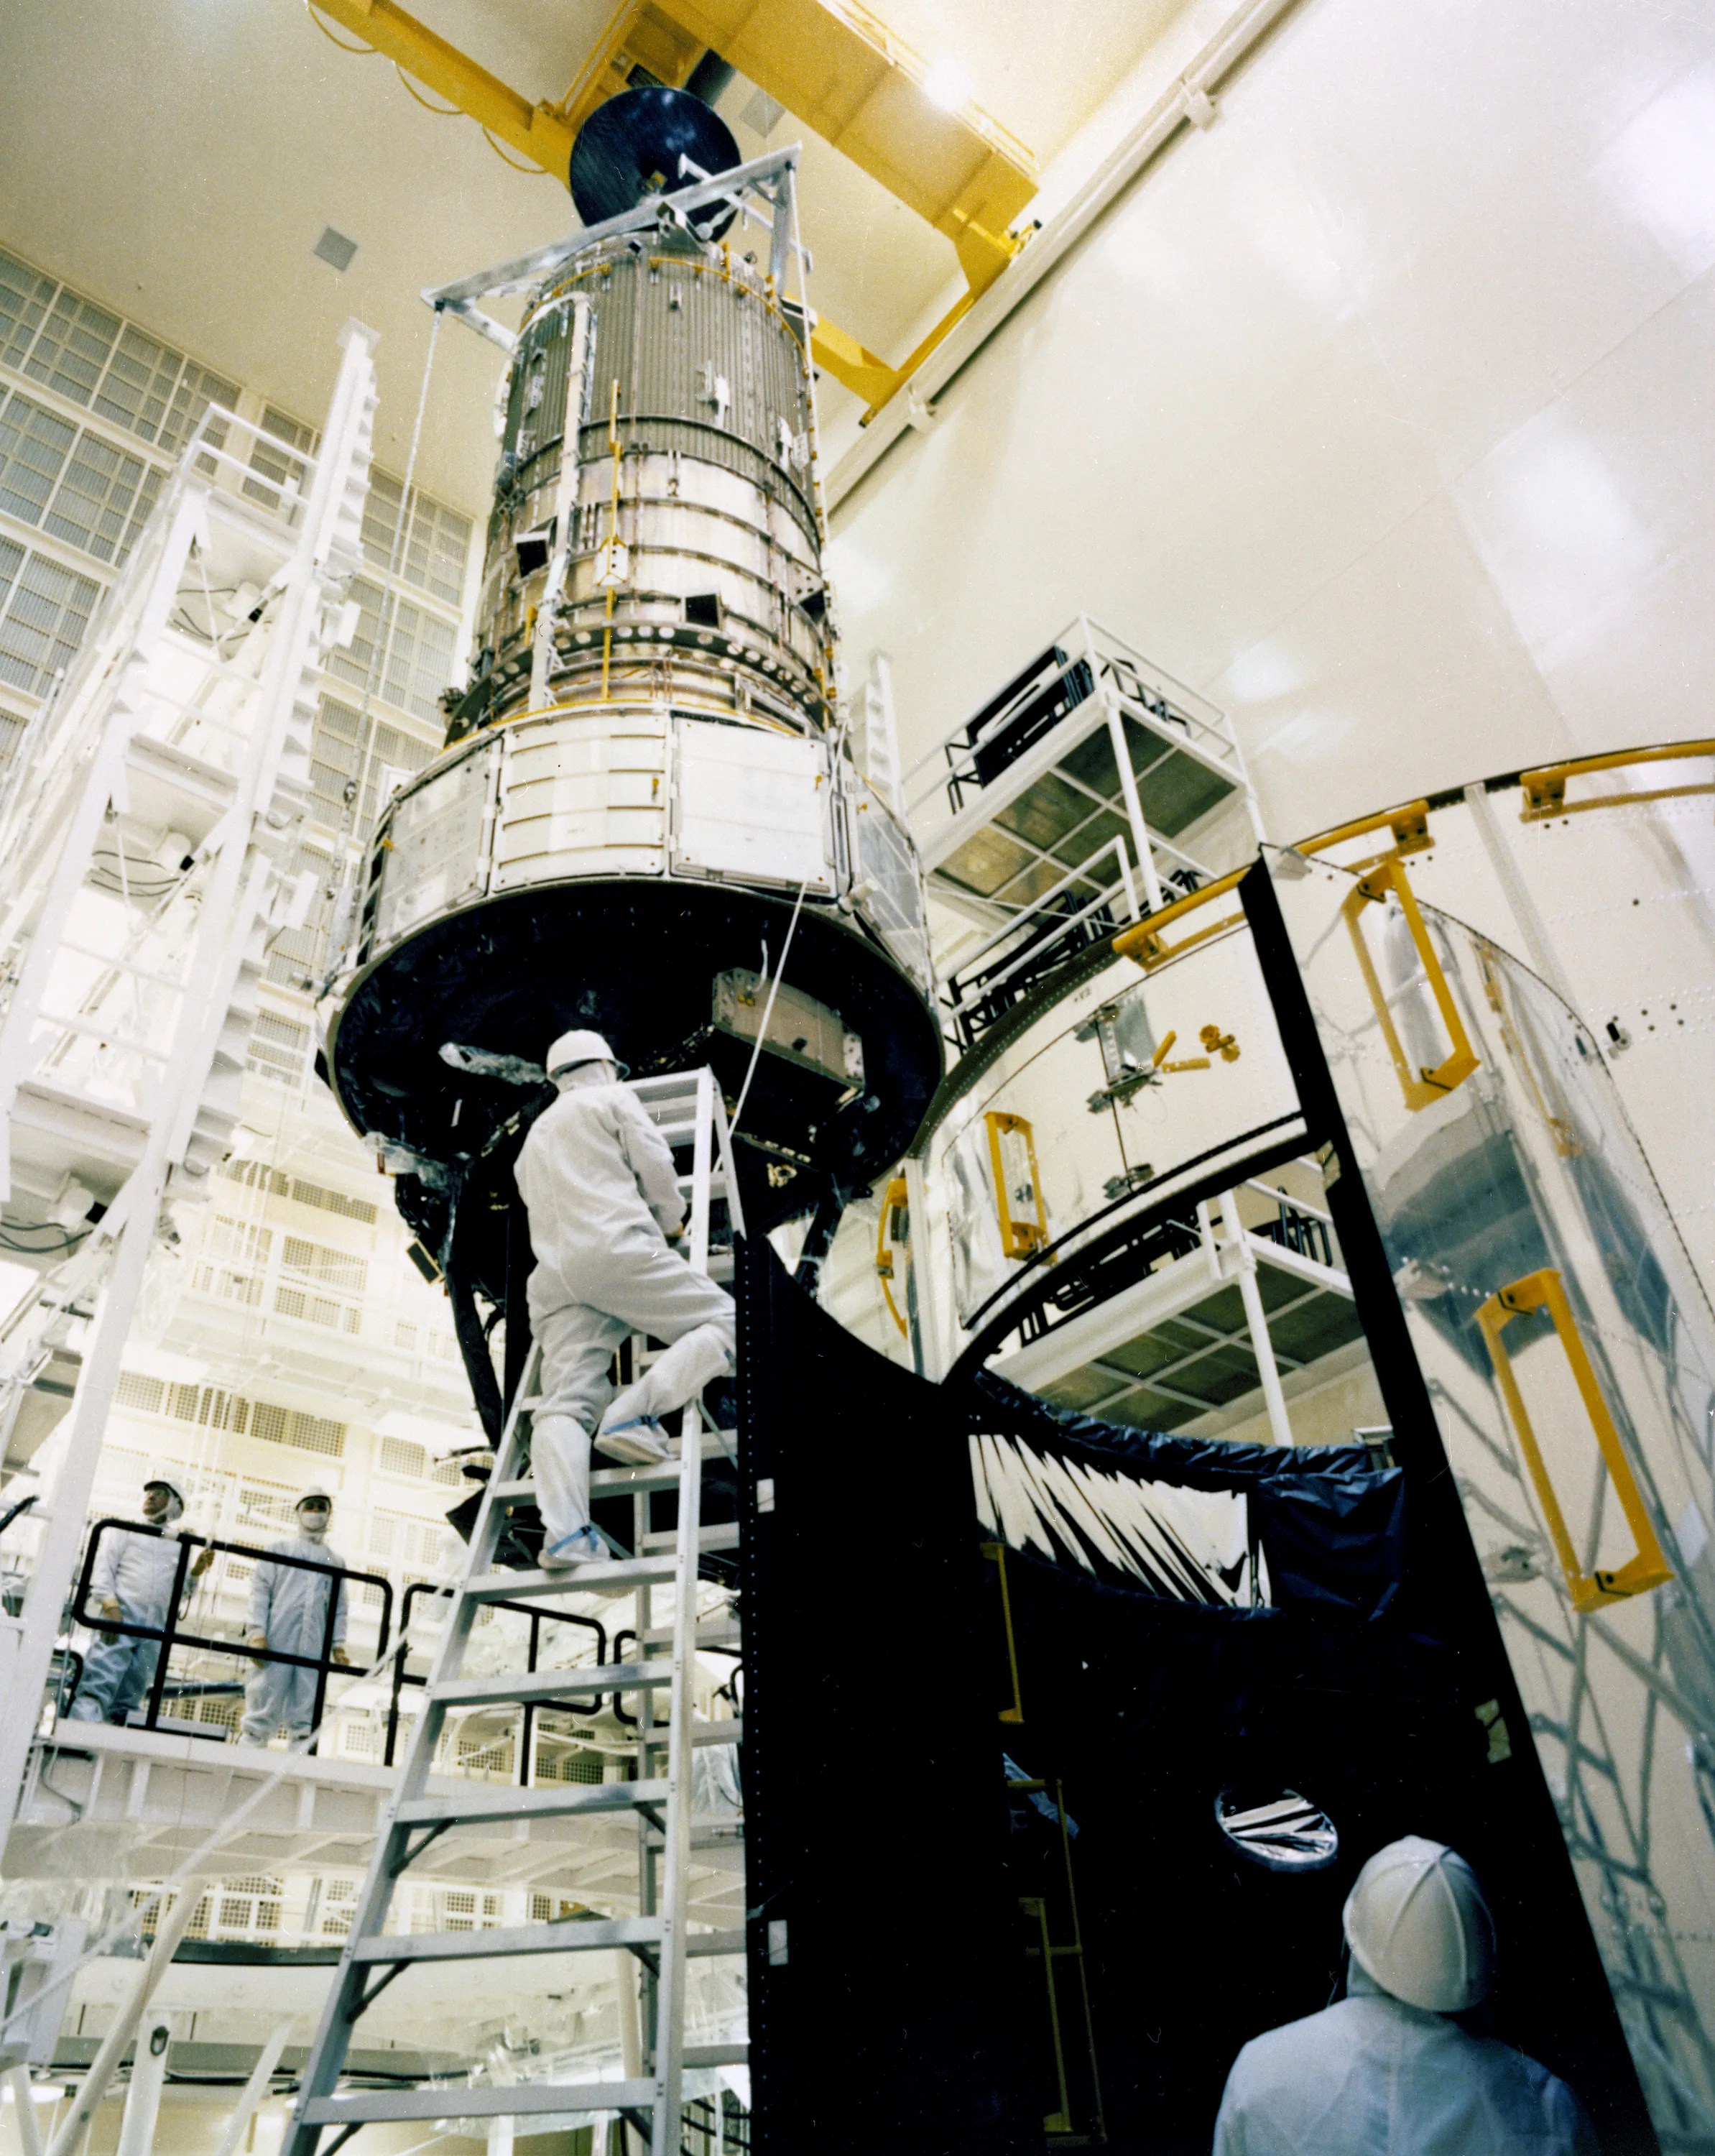 A white-garbed worker wearing a helmet climbs a ladder to reach a portion of the Hubble Space Telescope under assembly in a clean room.